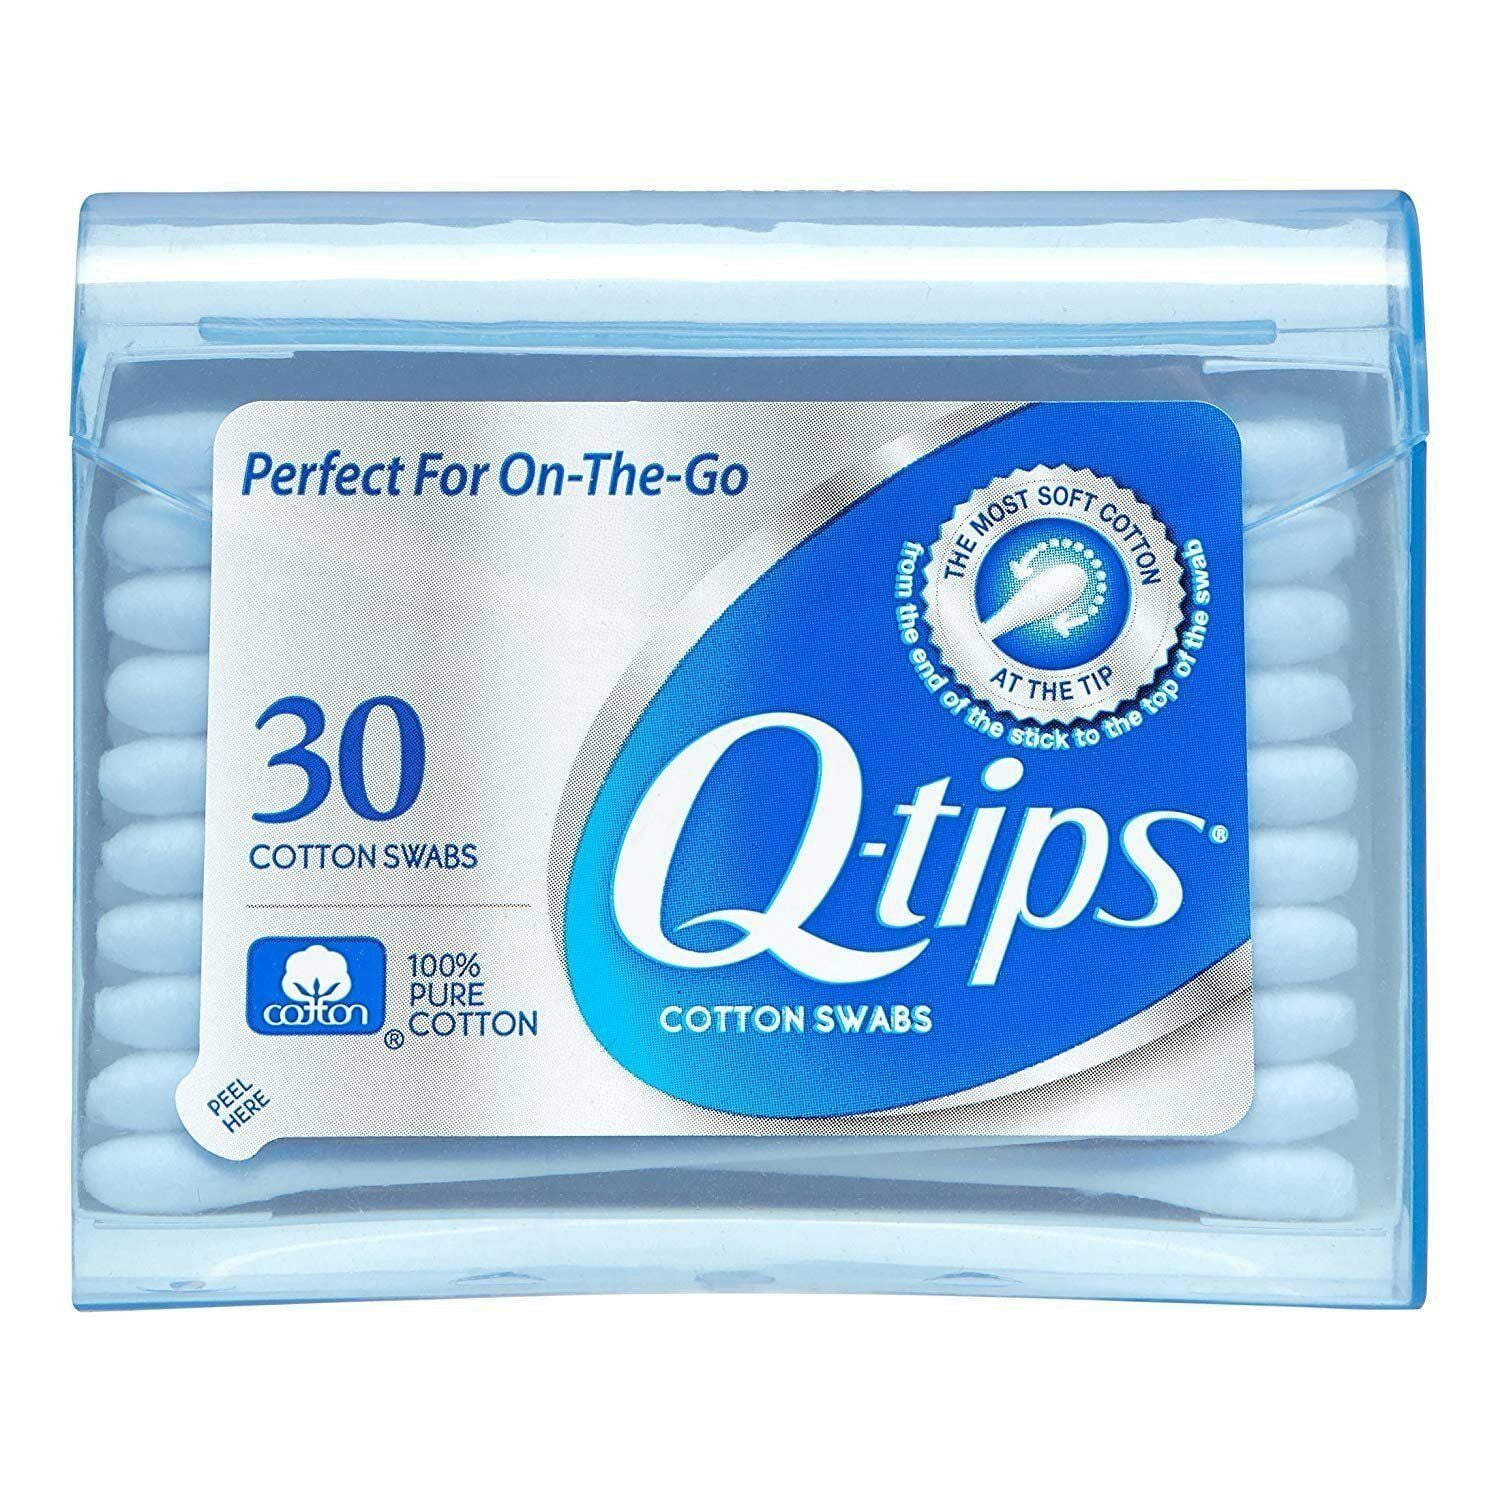 Q-tips® Cotton Swabs Travel Size Purse Pack, 30 ct - Baker's